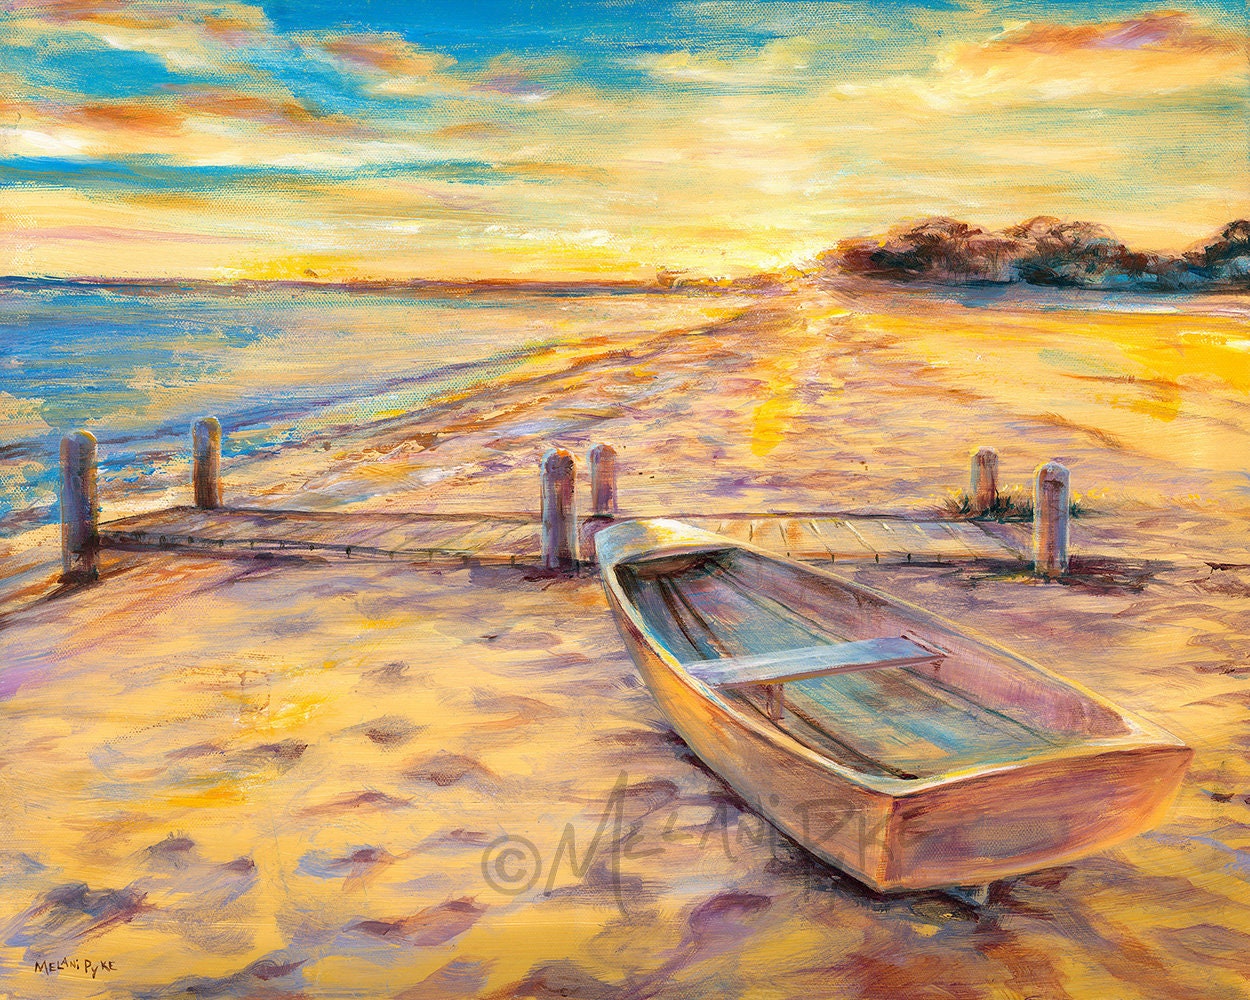 Boat on the Beach Art Print on Paper or Canvas With Dock